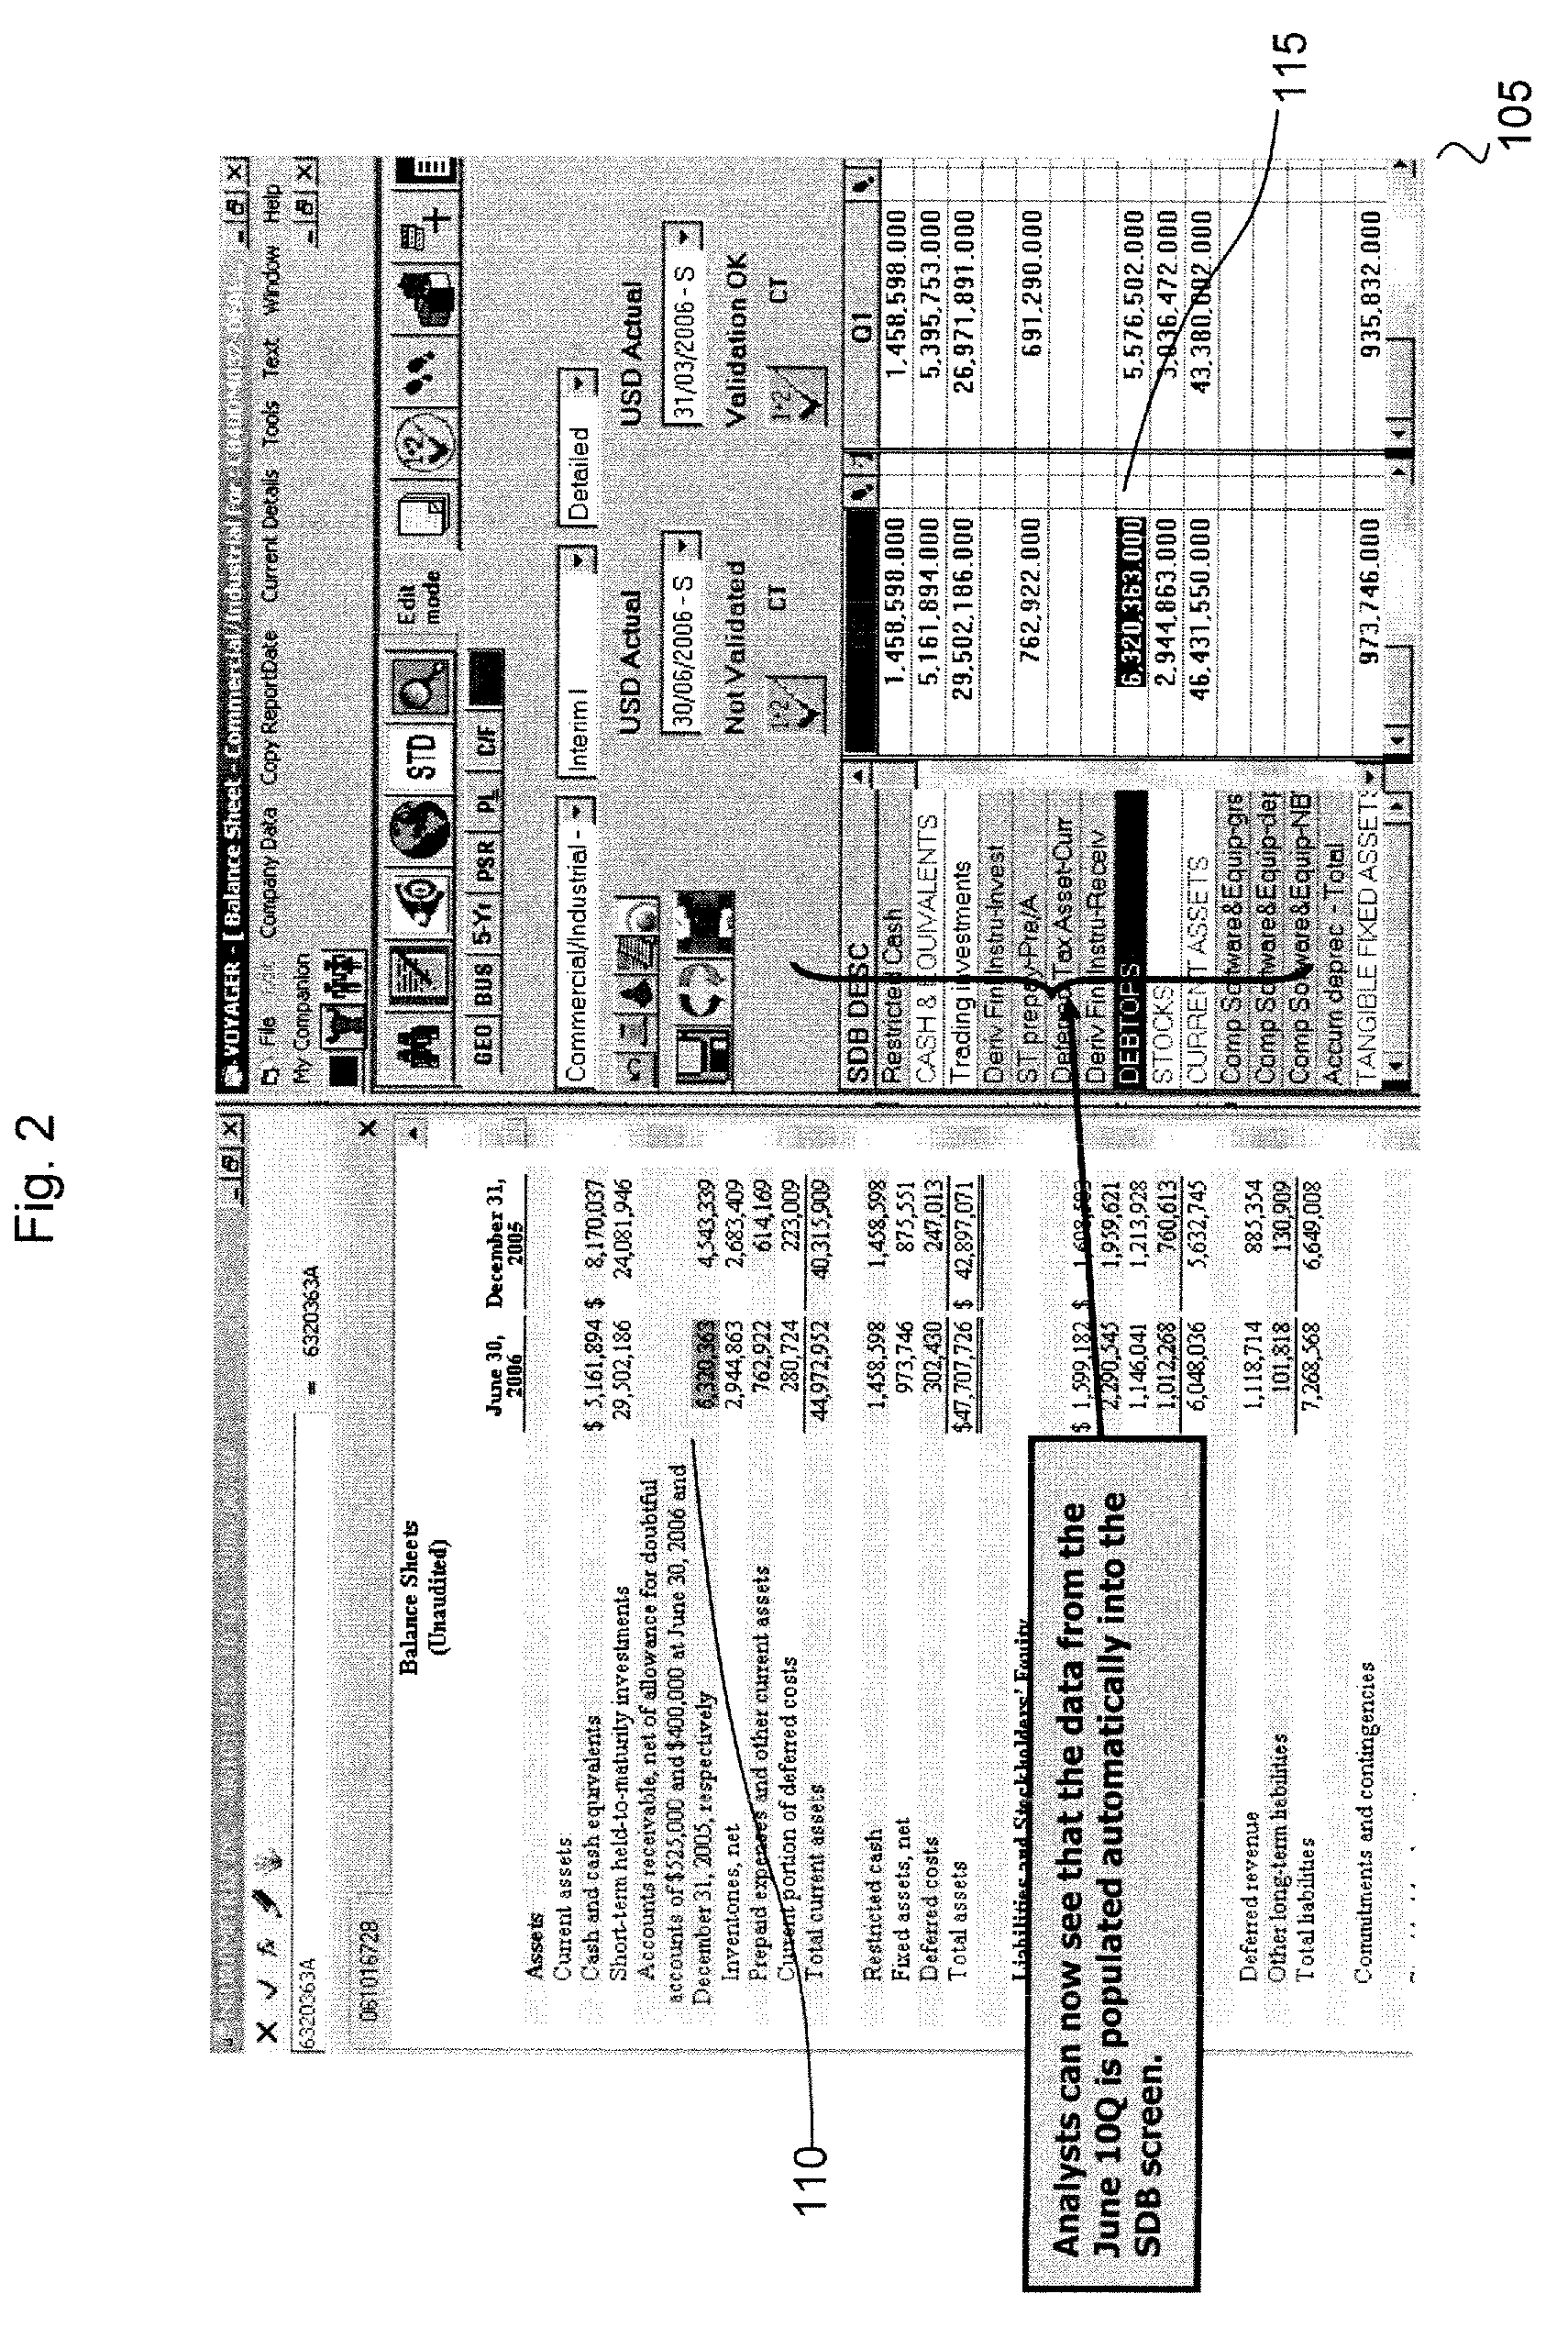 Method and System for Click-Thru Capability in Electronic Media